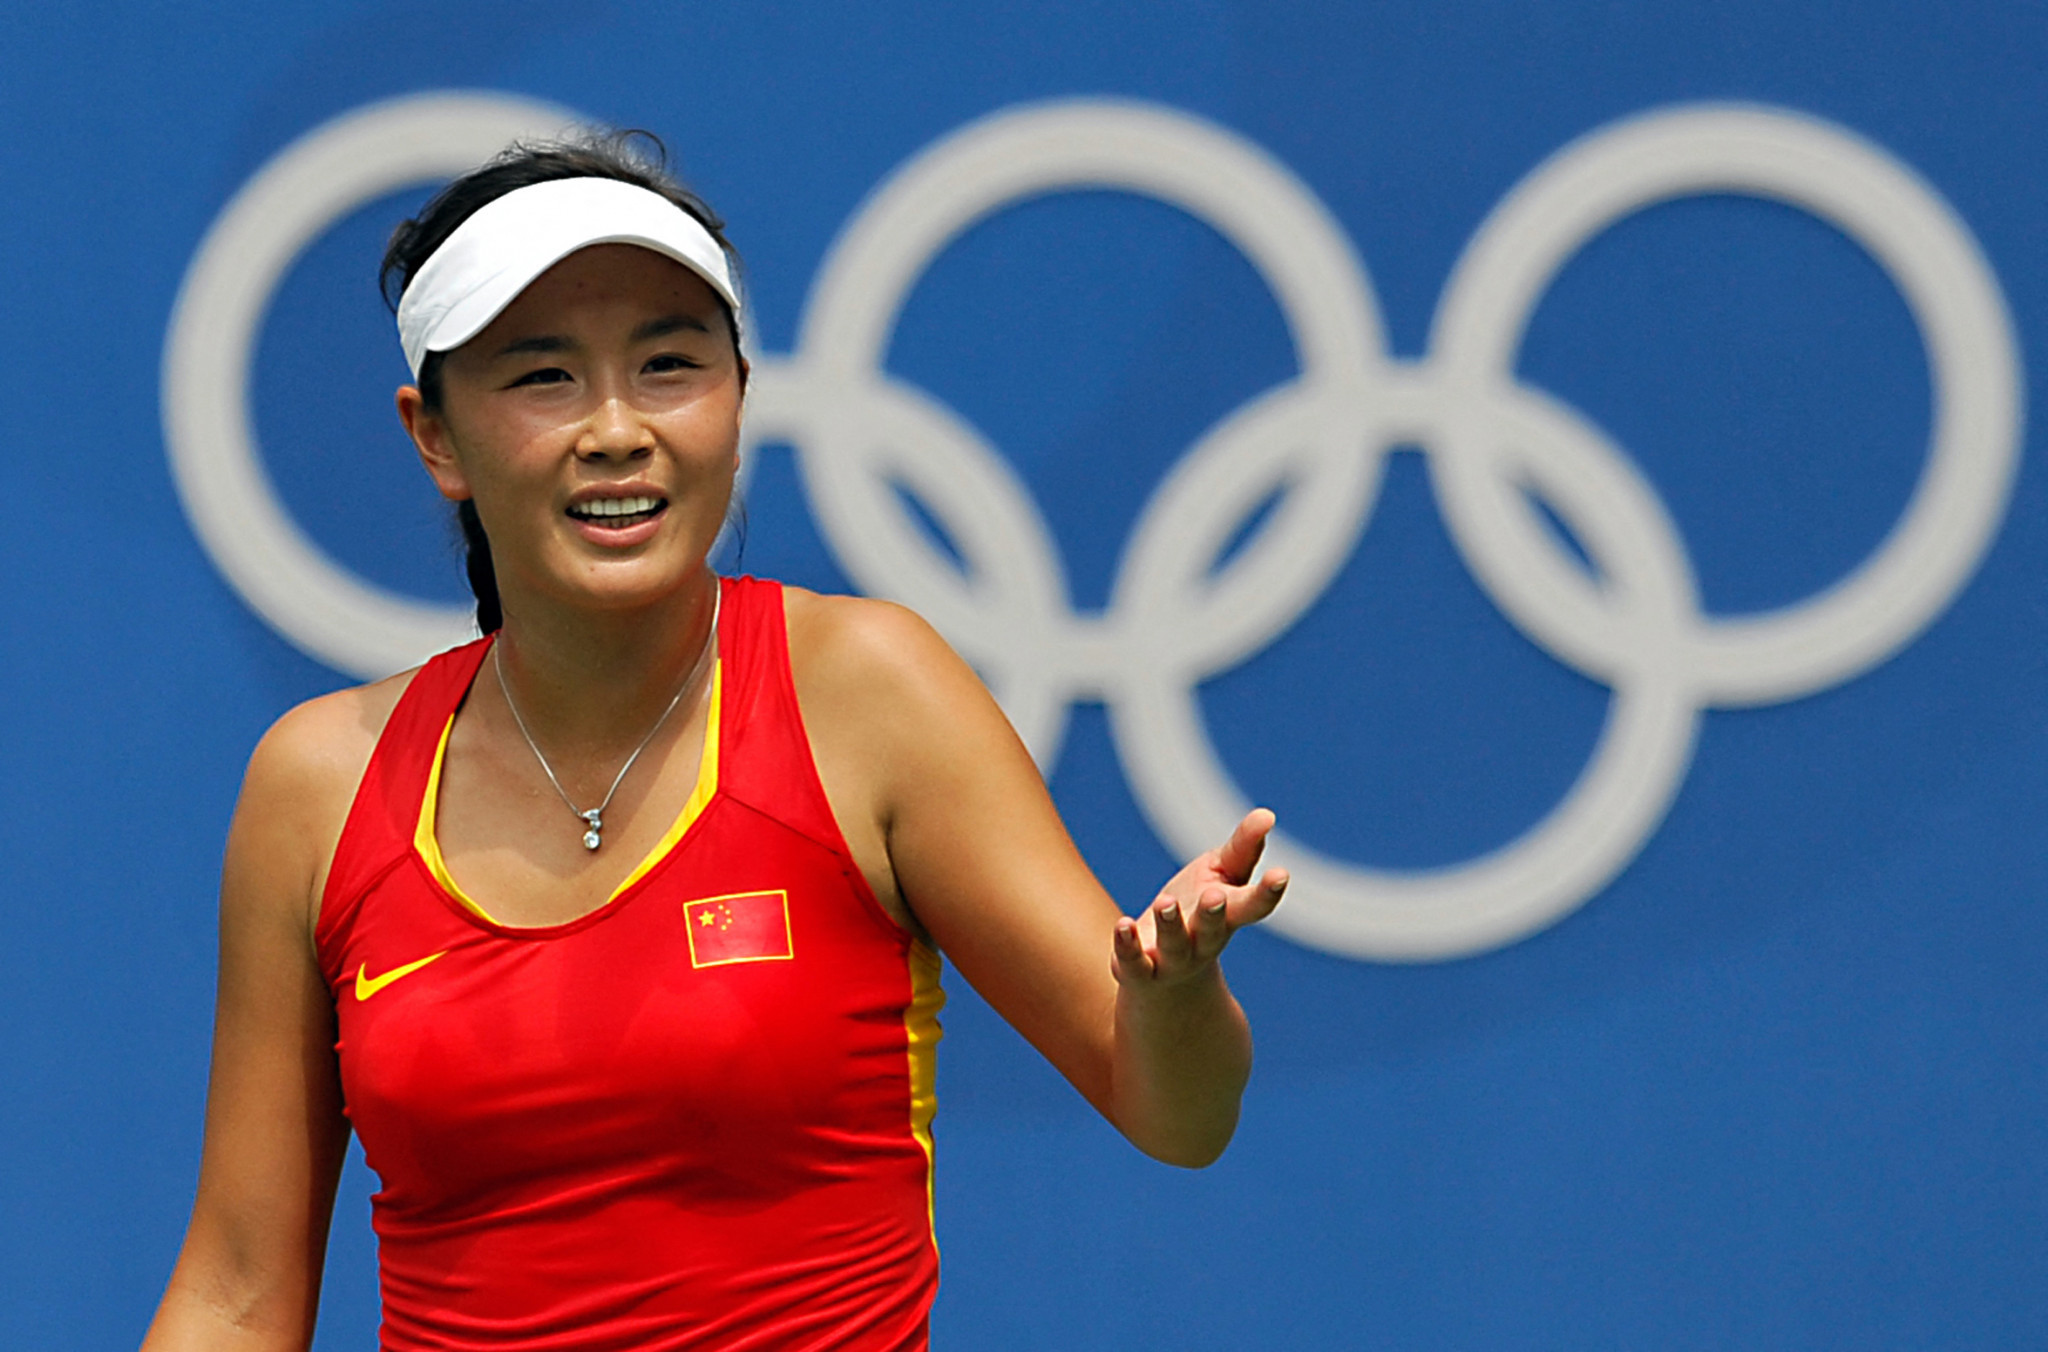 Peng Shuai competed at the Beijing 2008, London 2012 and Rio 2016 Olympics ©Getty Images